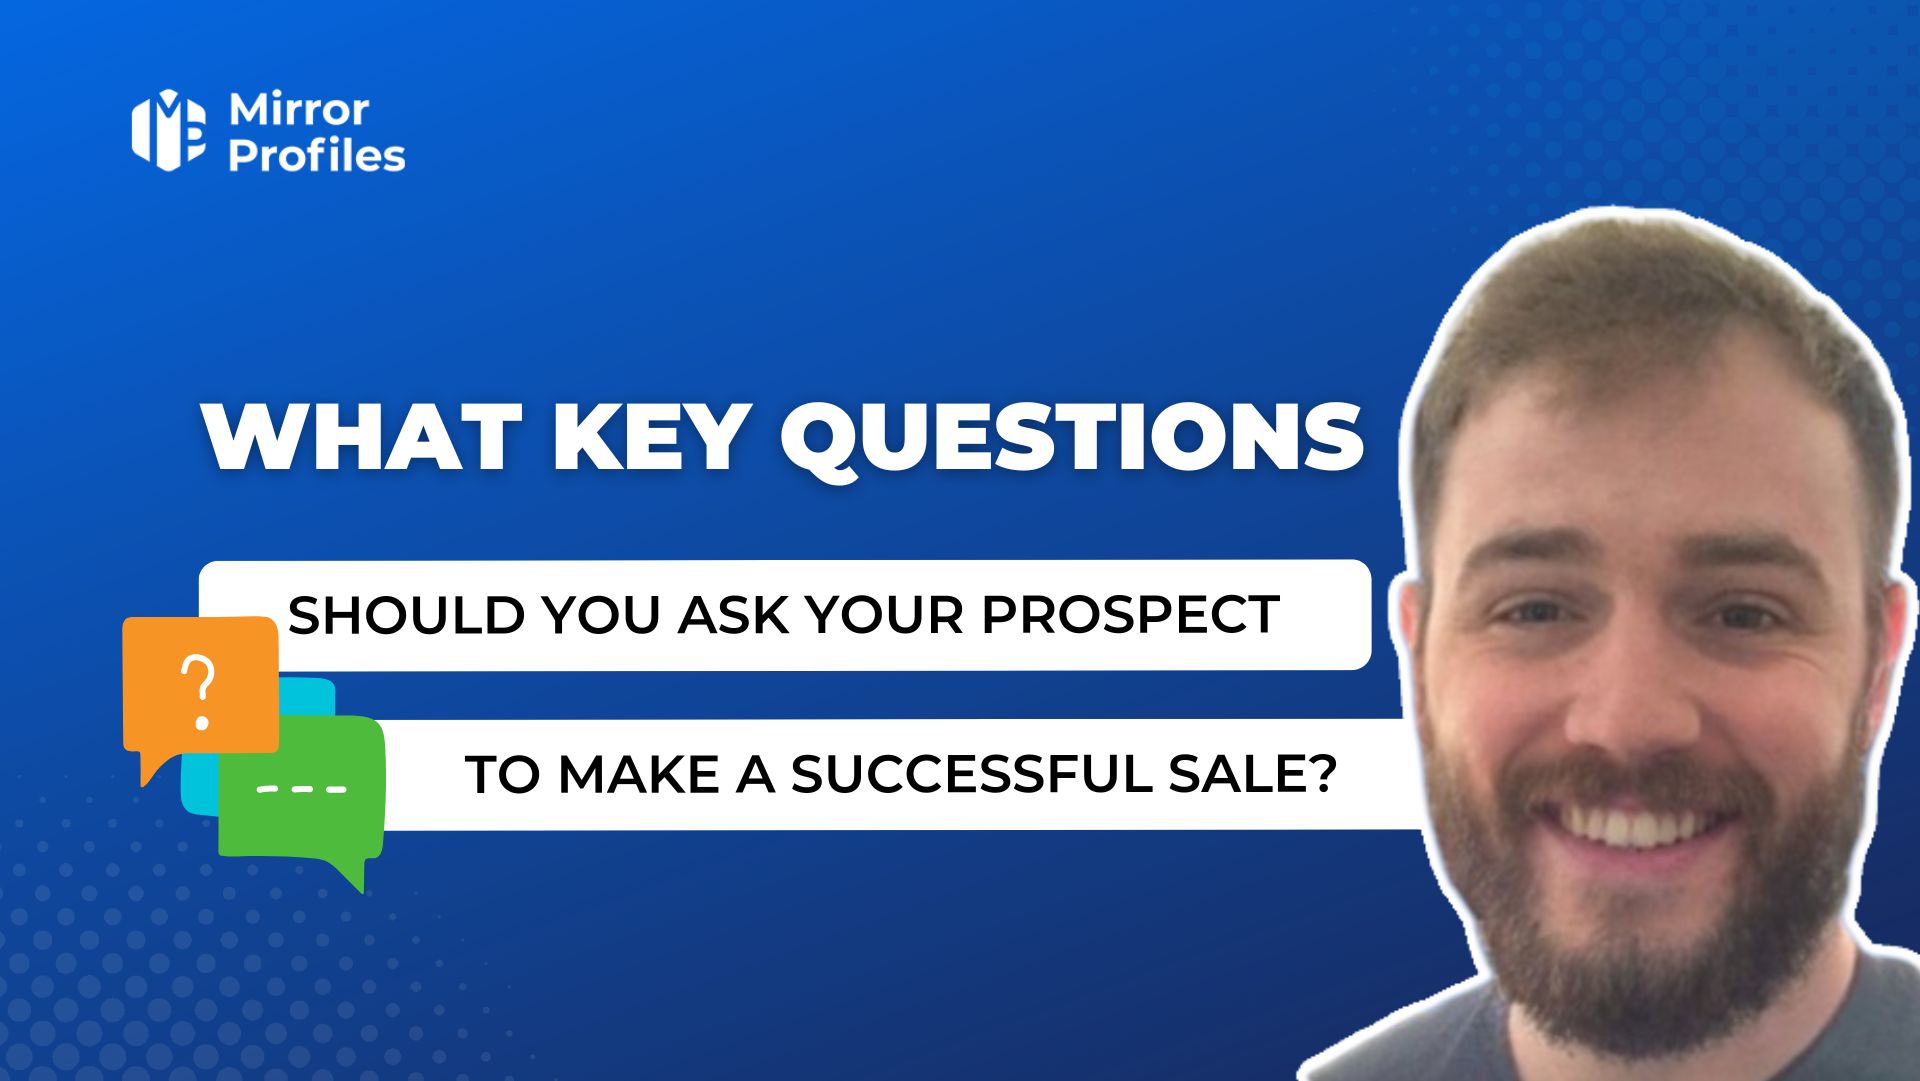 What key questions should you ask your prospect to make a successful sale?